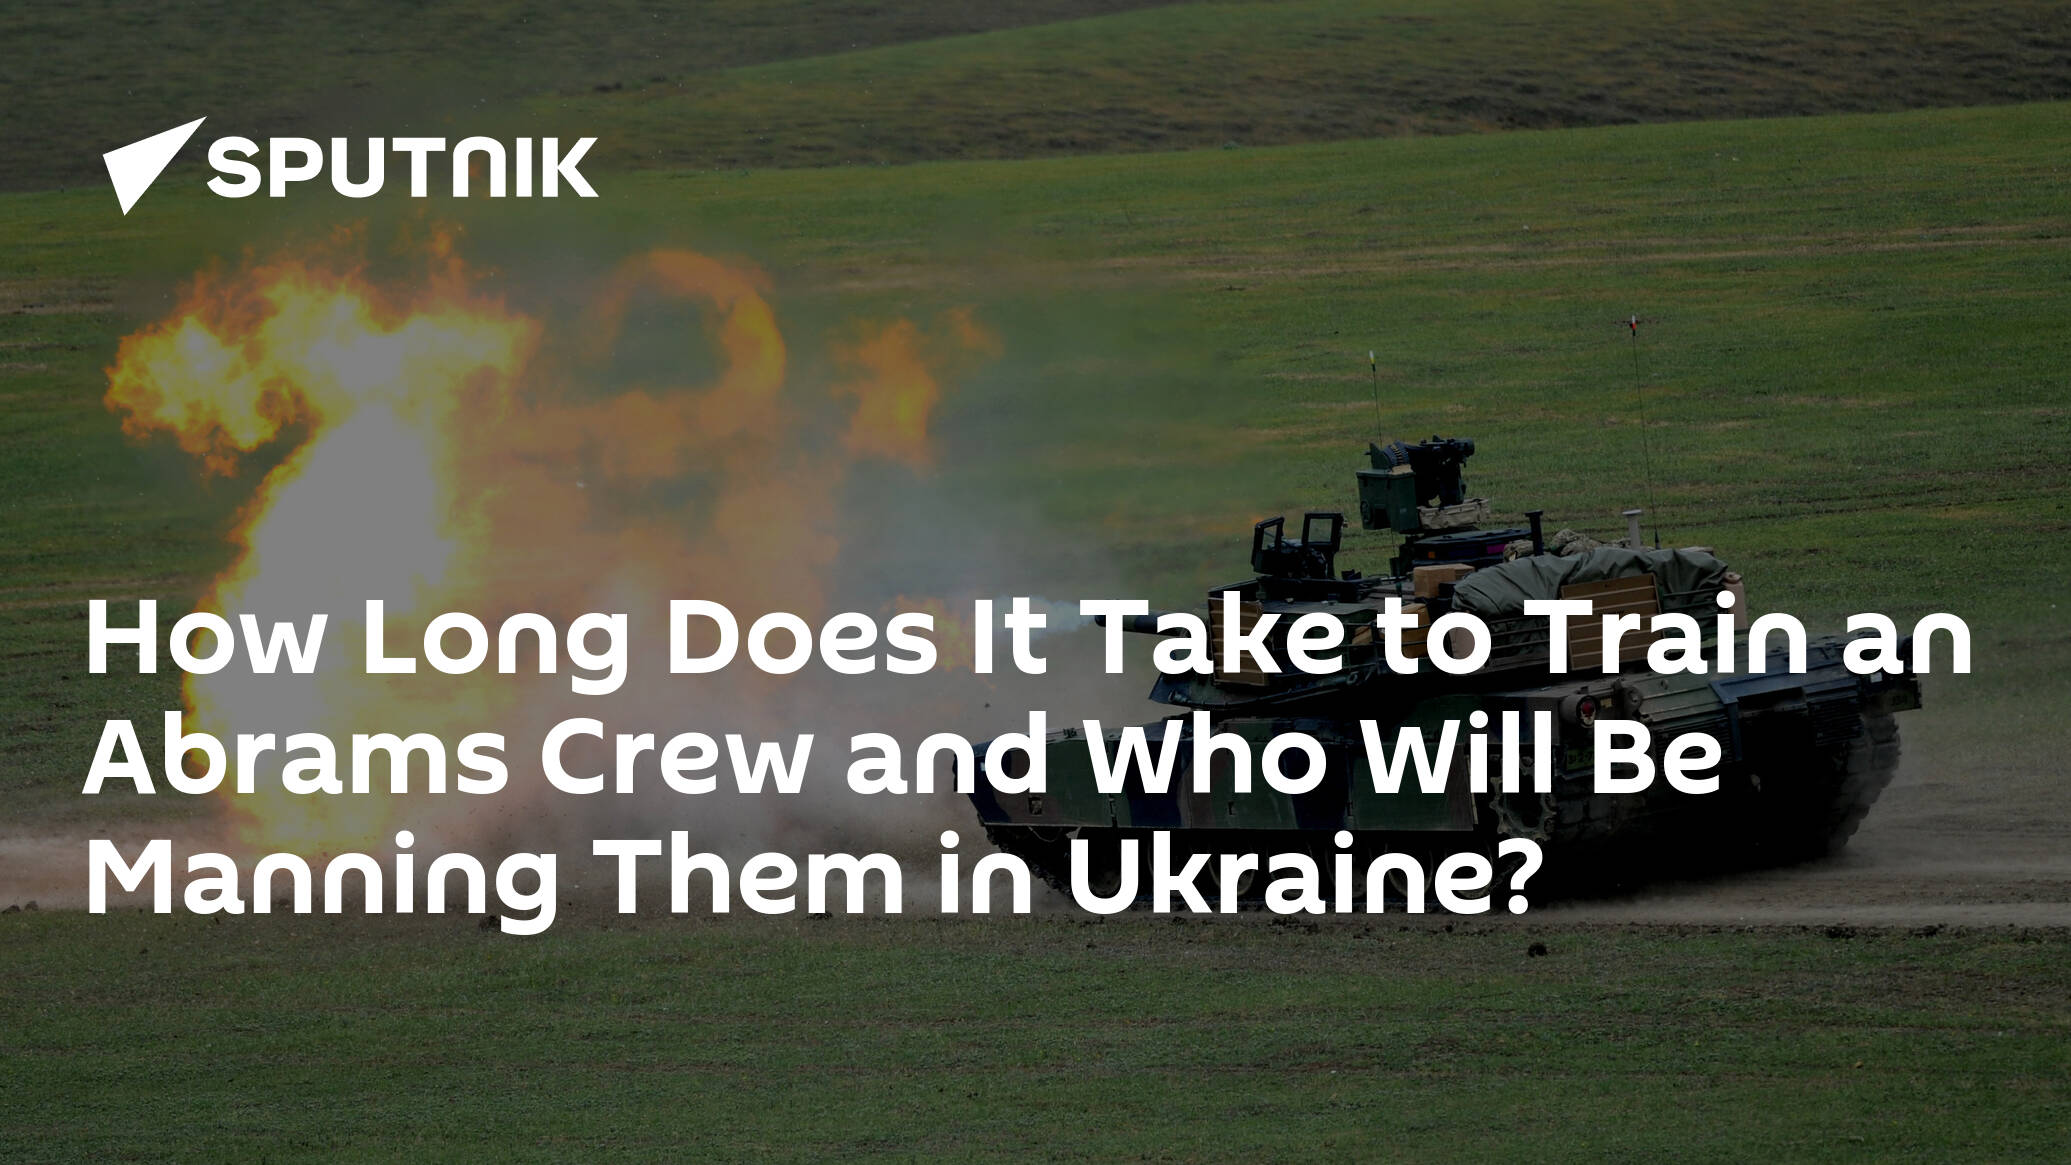 How Long Does It Take to Train an Abrams Crew and Who Will Be Manning Them in Ukraine?